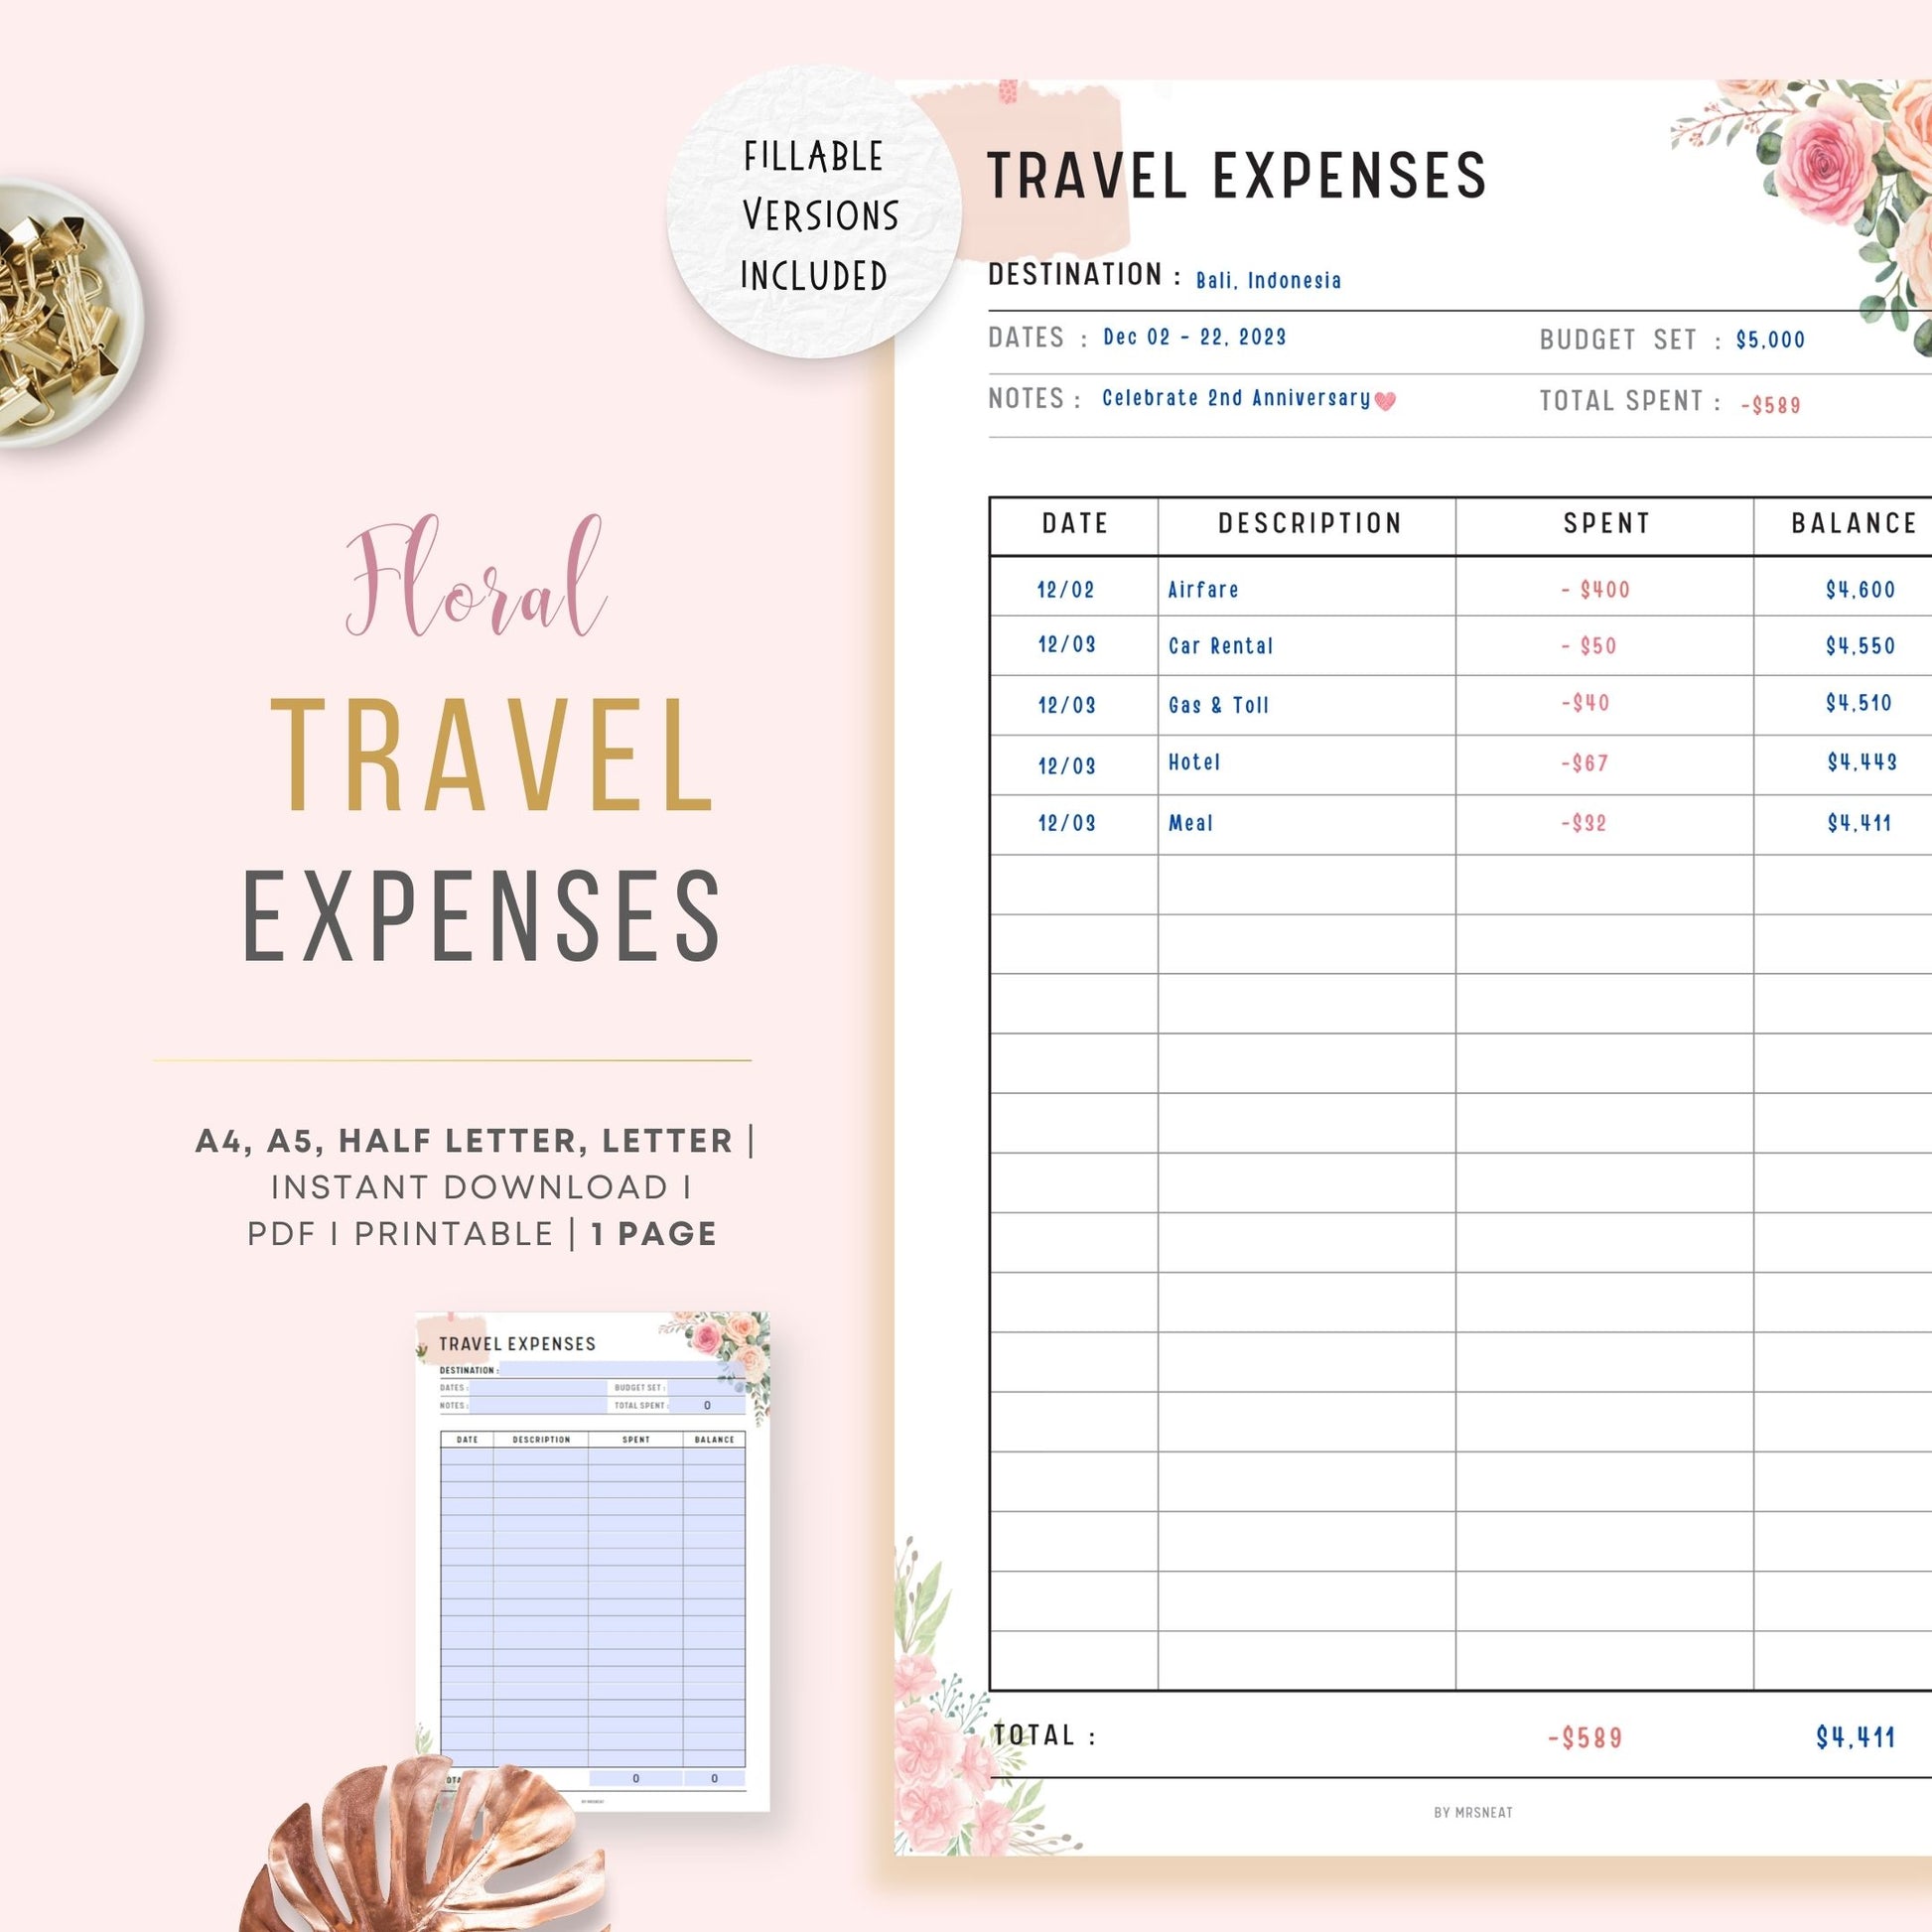 Floral Travel Expenses Tracker Template Printable, A4, A5, Letter, Half Letter, Fillable version included